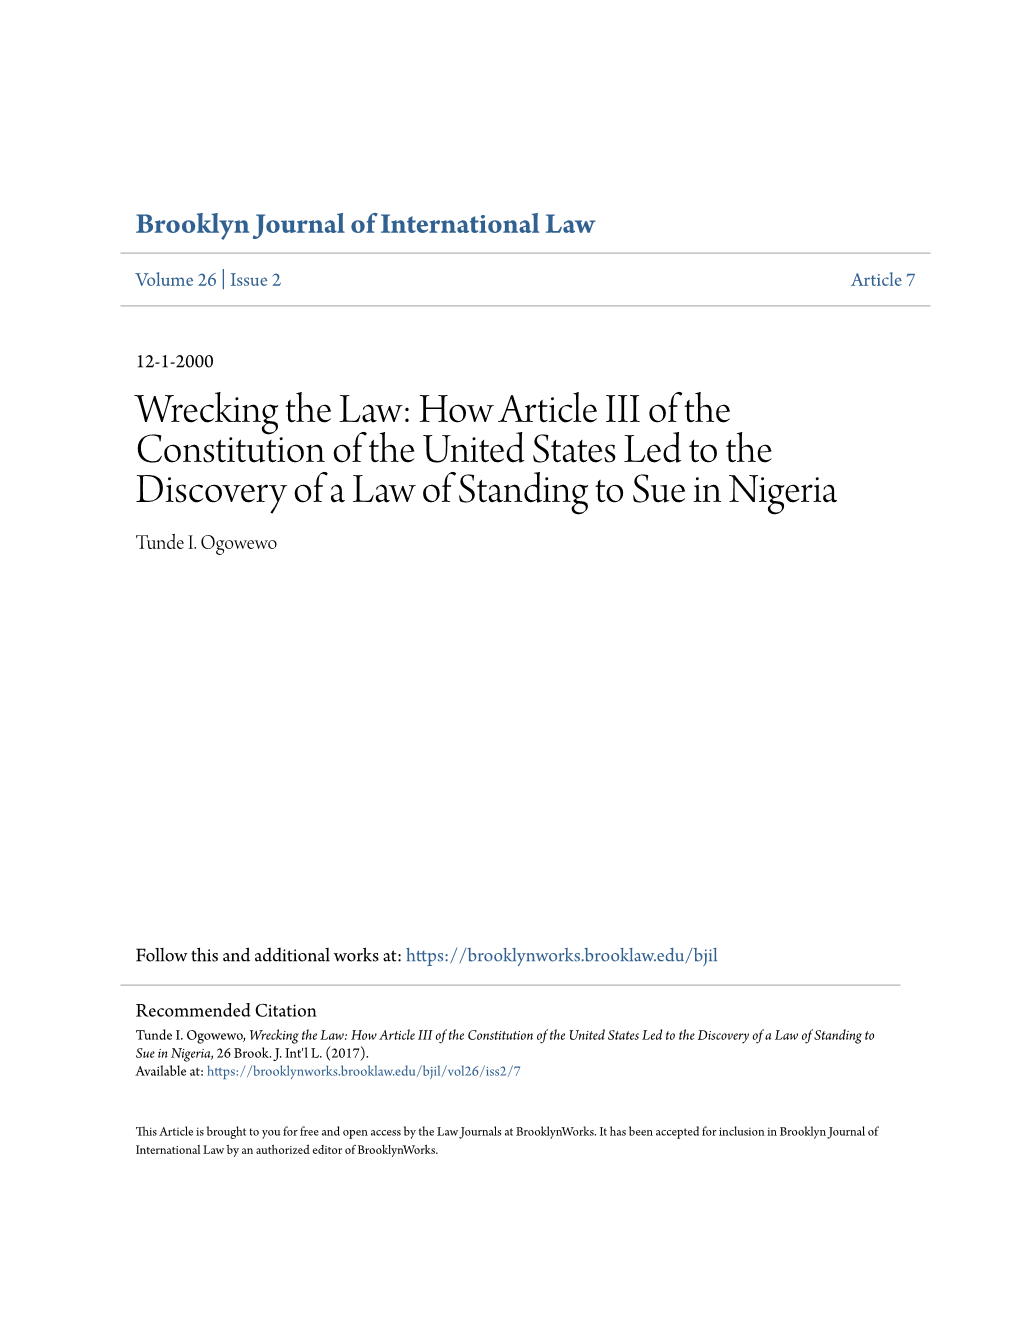 Wrecking the Law: How Article III of the Constitution of the United States Led to the Discovery of a Law of Standing to Sue in Nigeria Tunde I